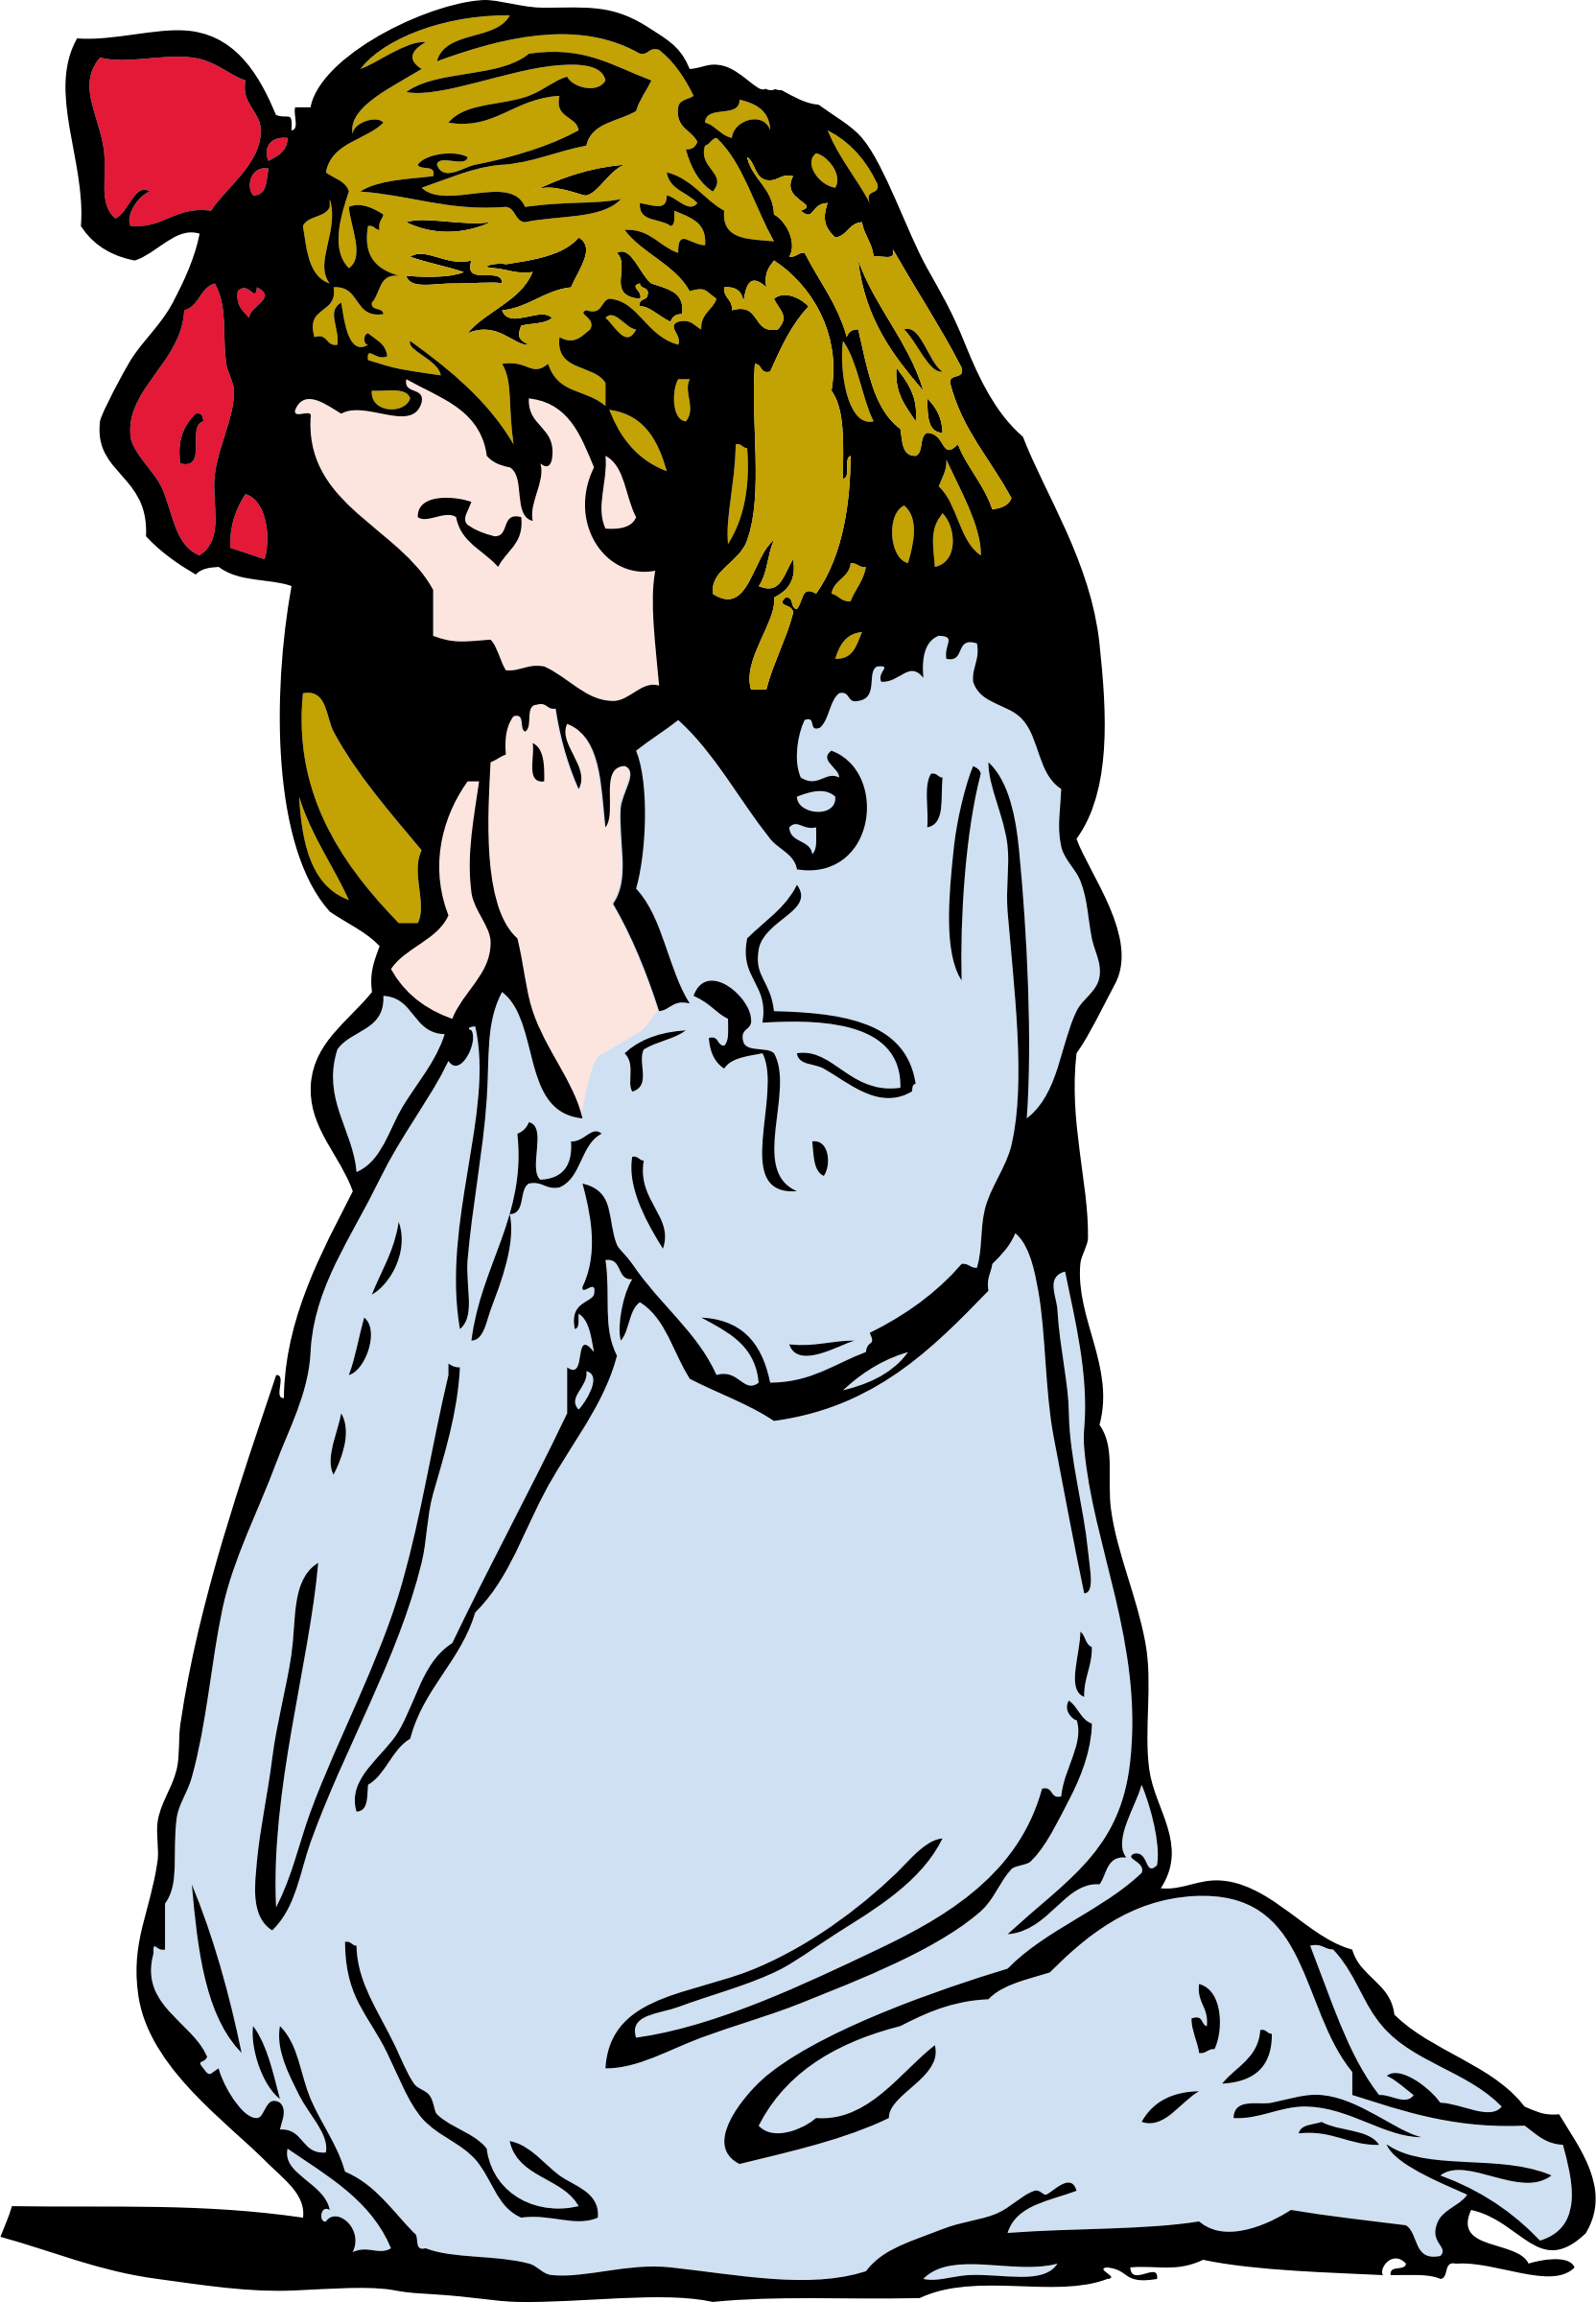 https://www.goodfreephotos.com/albums/vector-images/young-girl-praying-vector-clipart.png